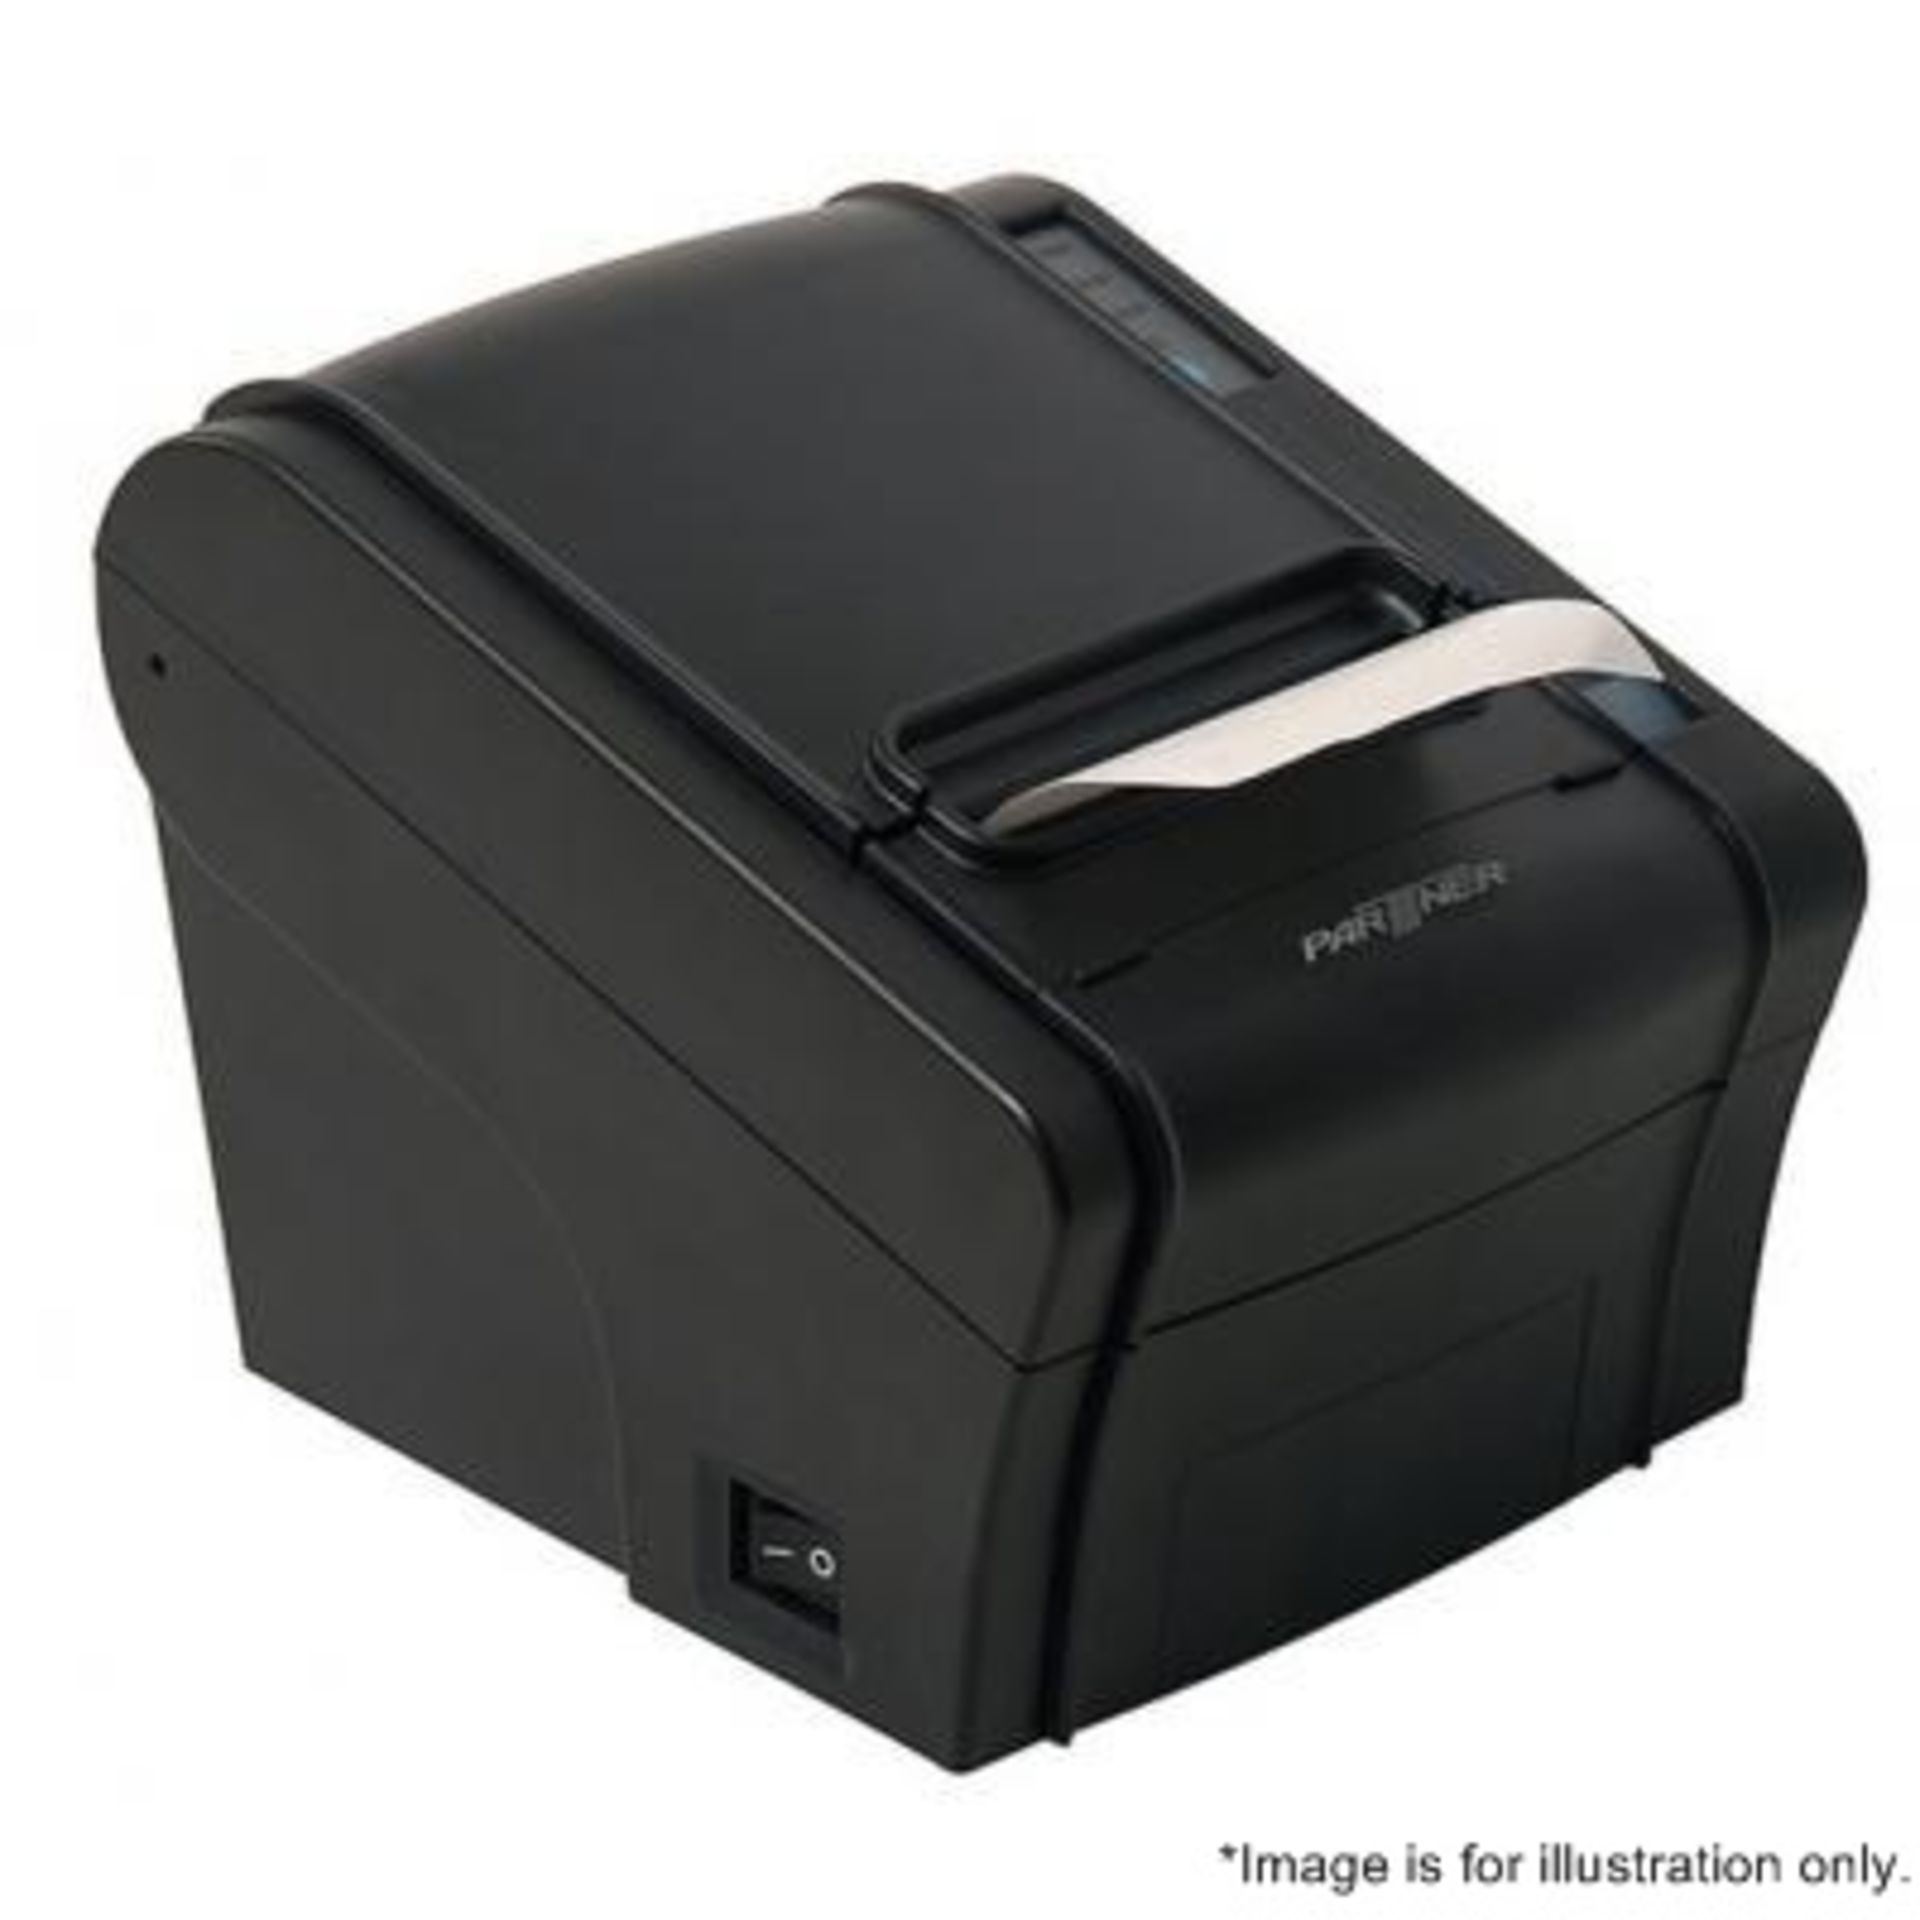 1 x Partner Tech RP-320 Thermal Receipt Printer - Removed From A Working Restaurant Enviroment -